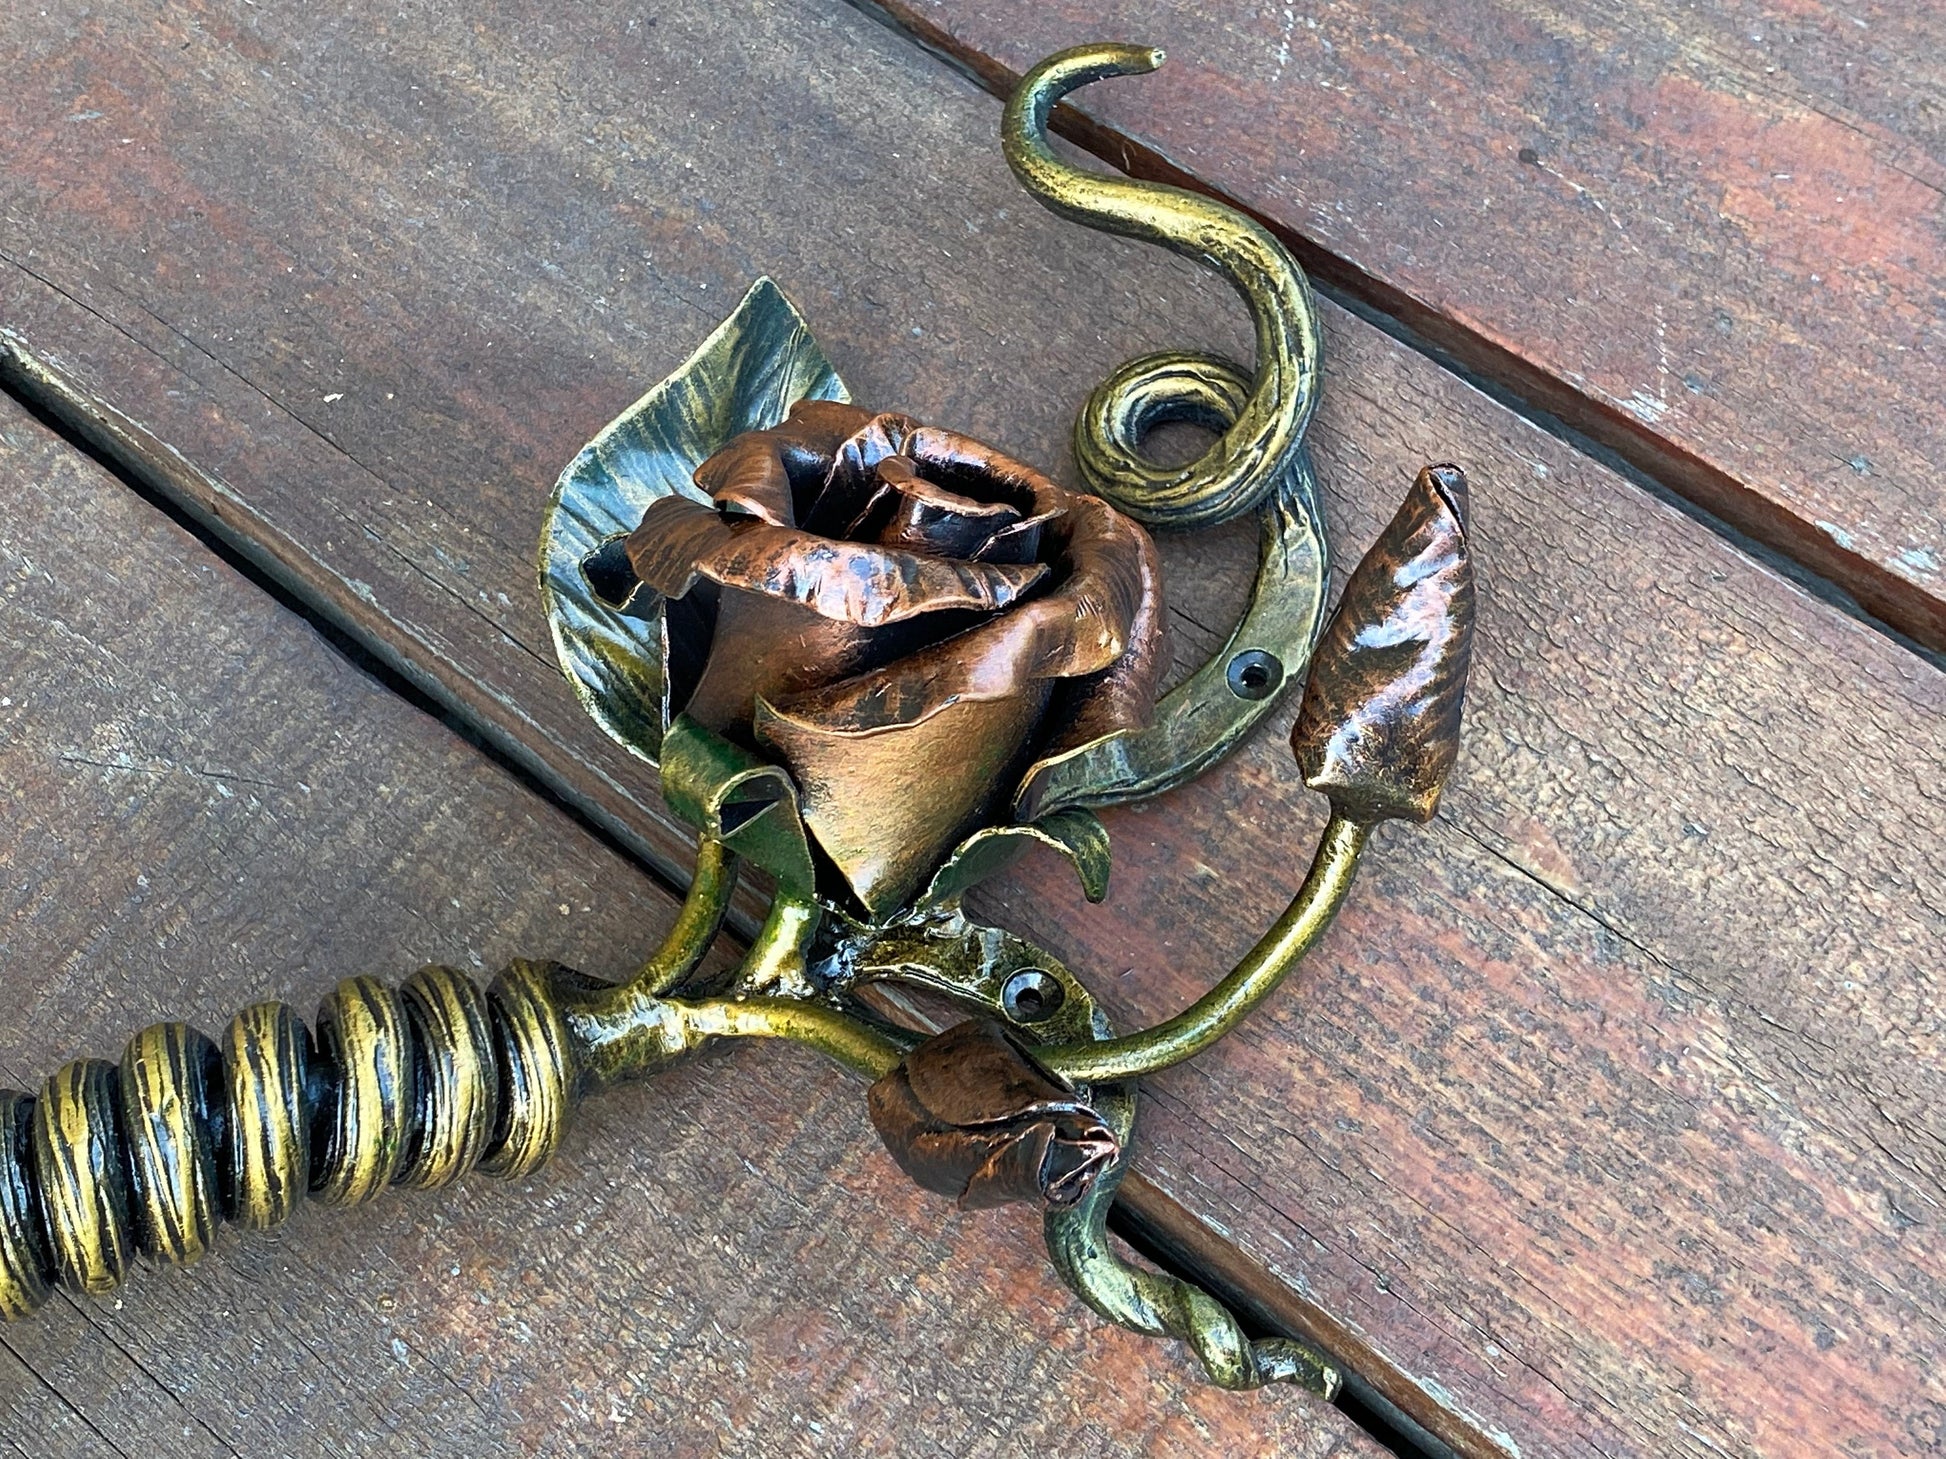 Door handle, rose, bud, petal, door pull, medieval, flower, Christmas, gift for mom, birthday, barn, anniversary, Middle Ages, iron gift